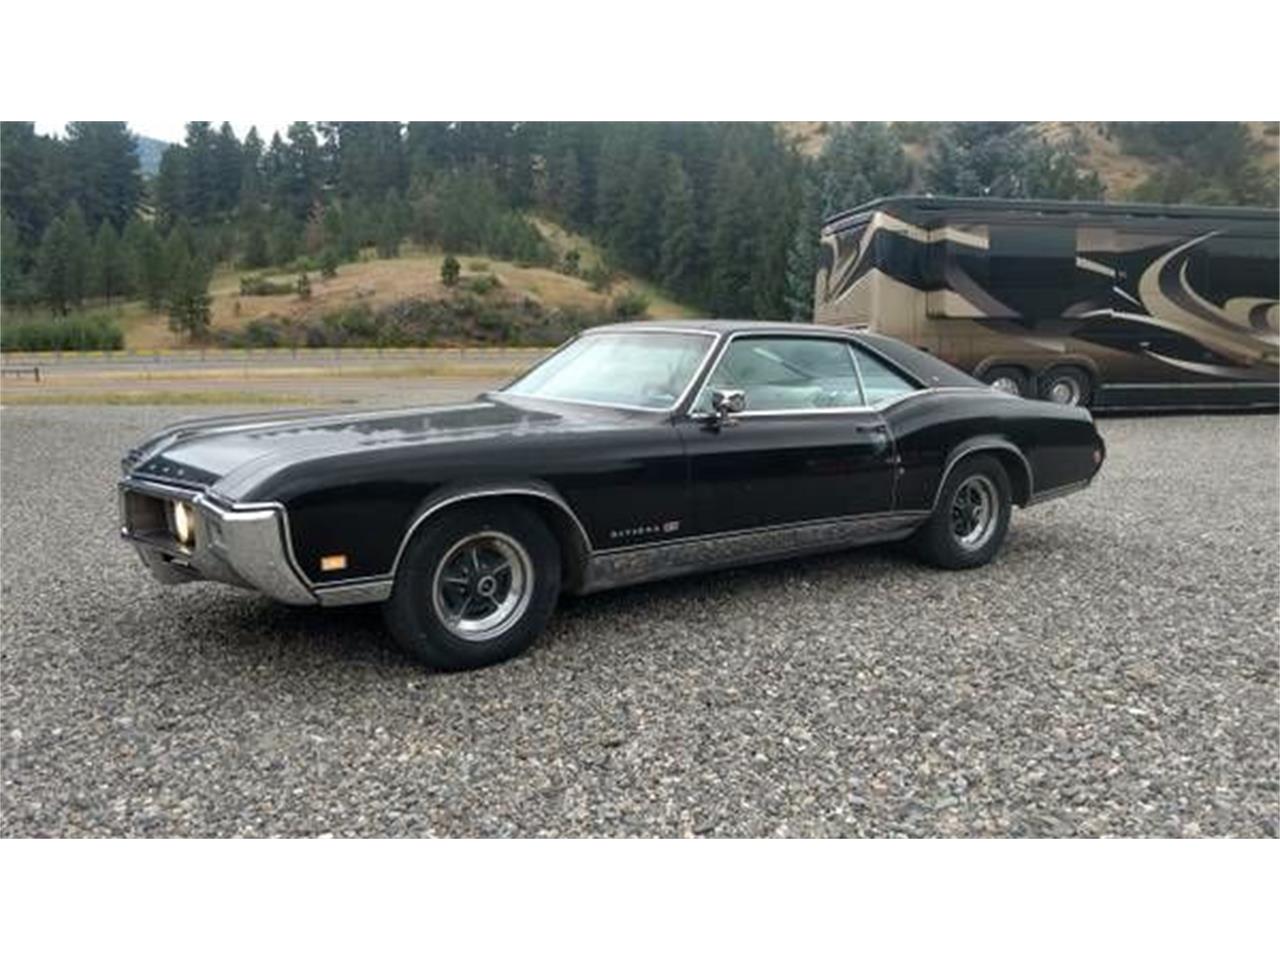 1968 buick riviera for sale classiccars com cc 1121492 1968 buick riviera for sale